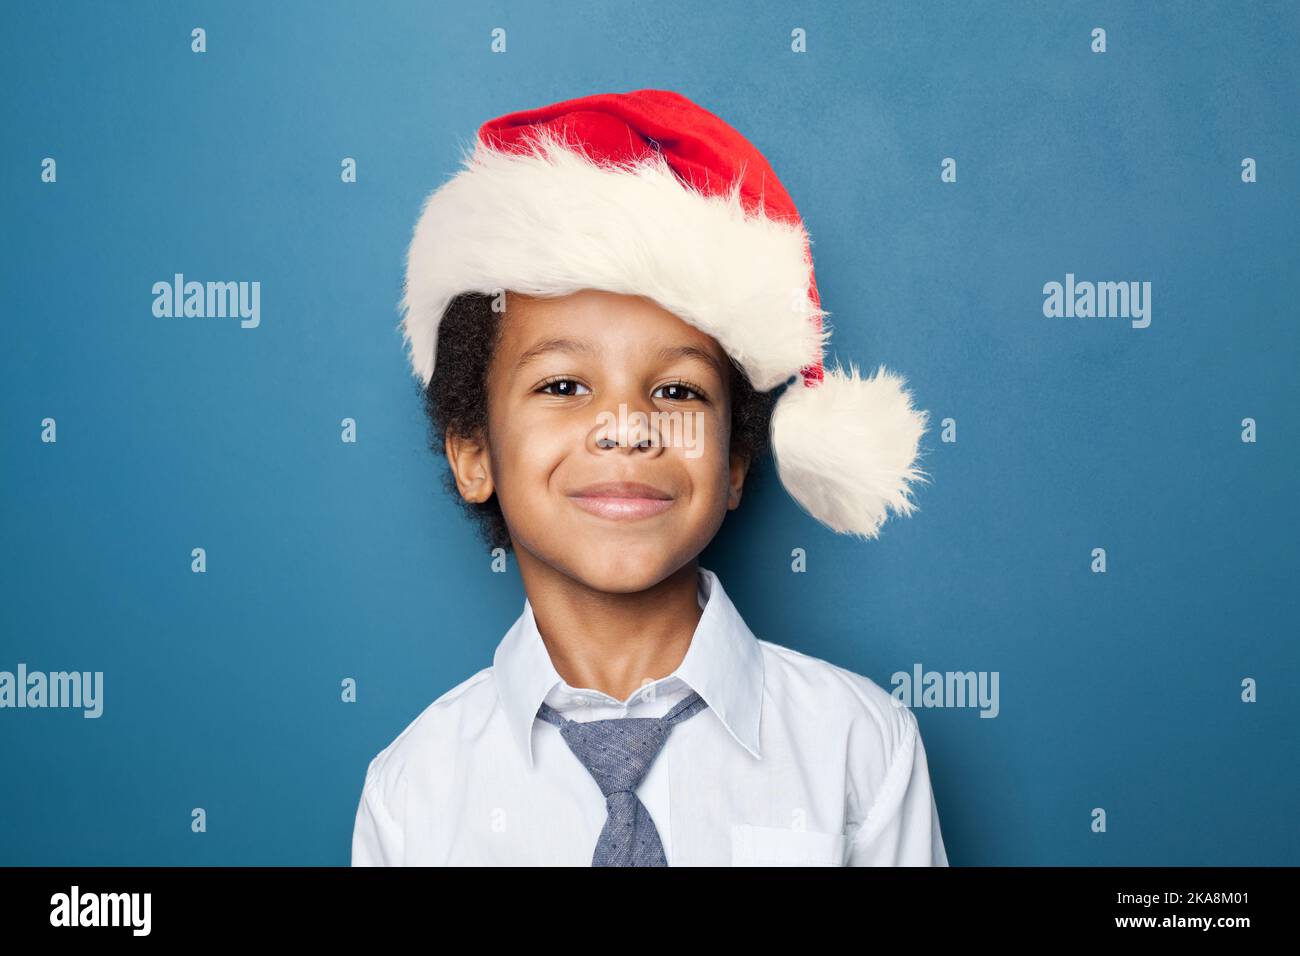 Adorable child boy in New Year hat smiling portrait Stock Photo - Alamy